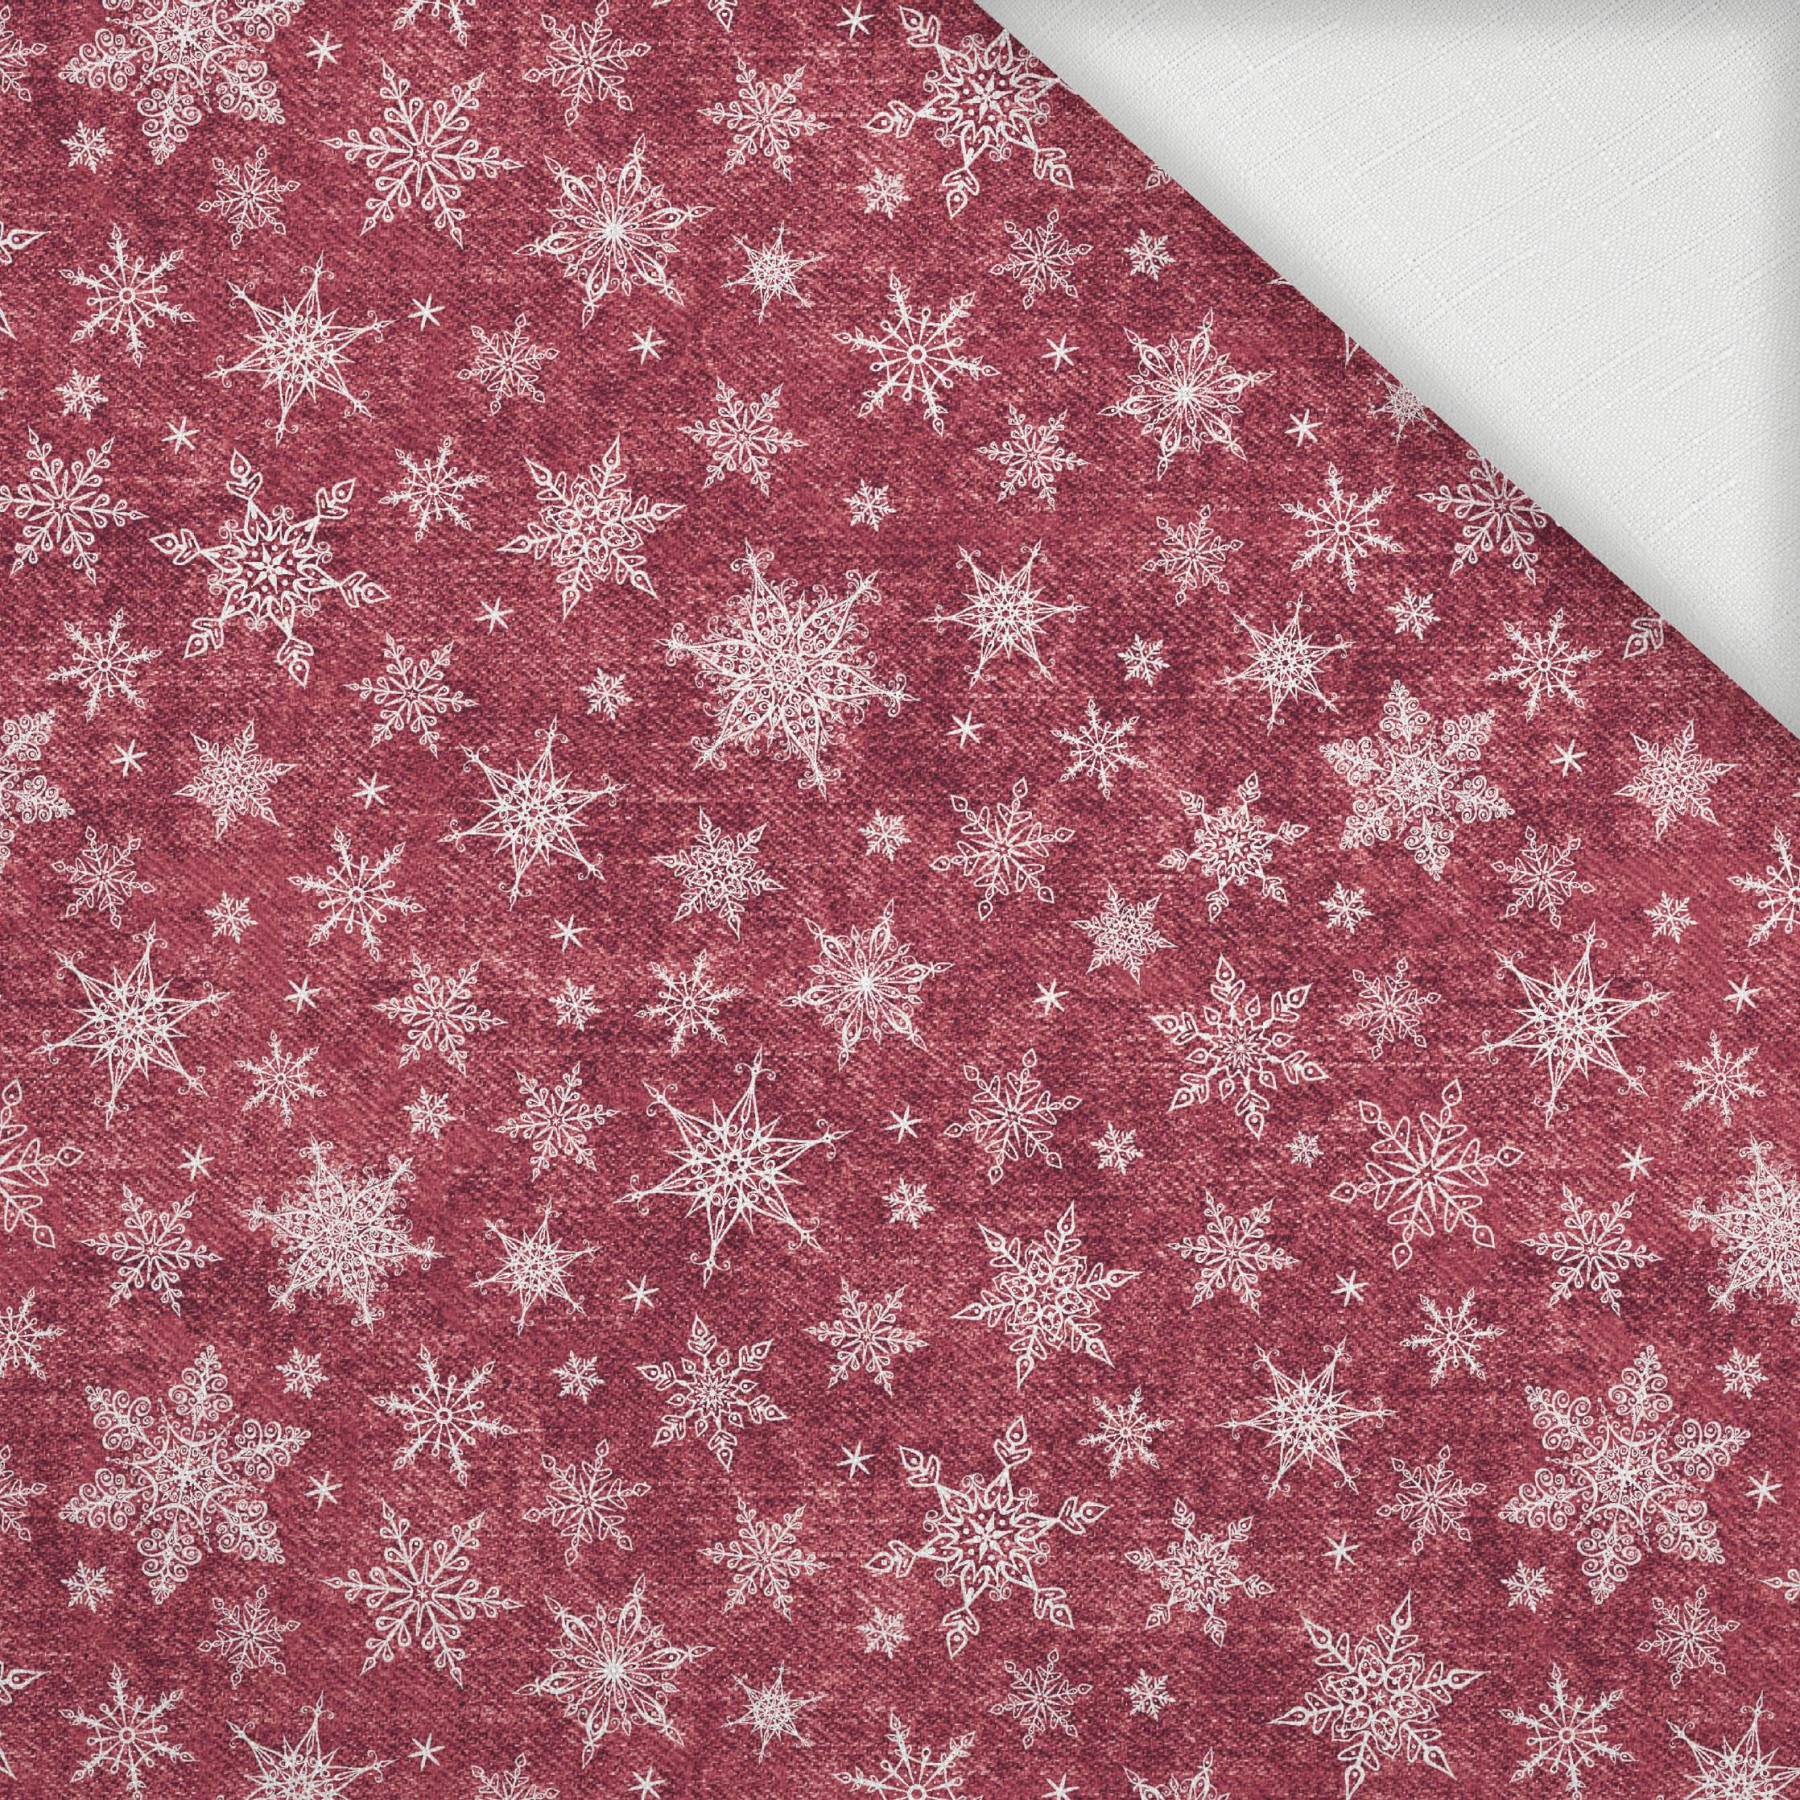 SNOWFLAKES PAT. 2 / ACID WASH MAROON  - Woven Fabric for tablecloths